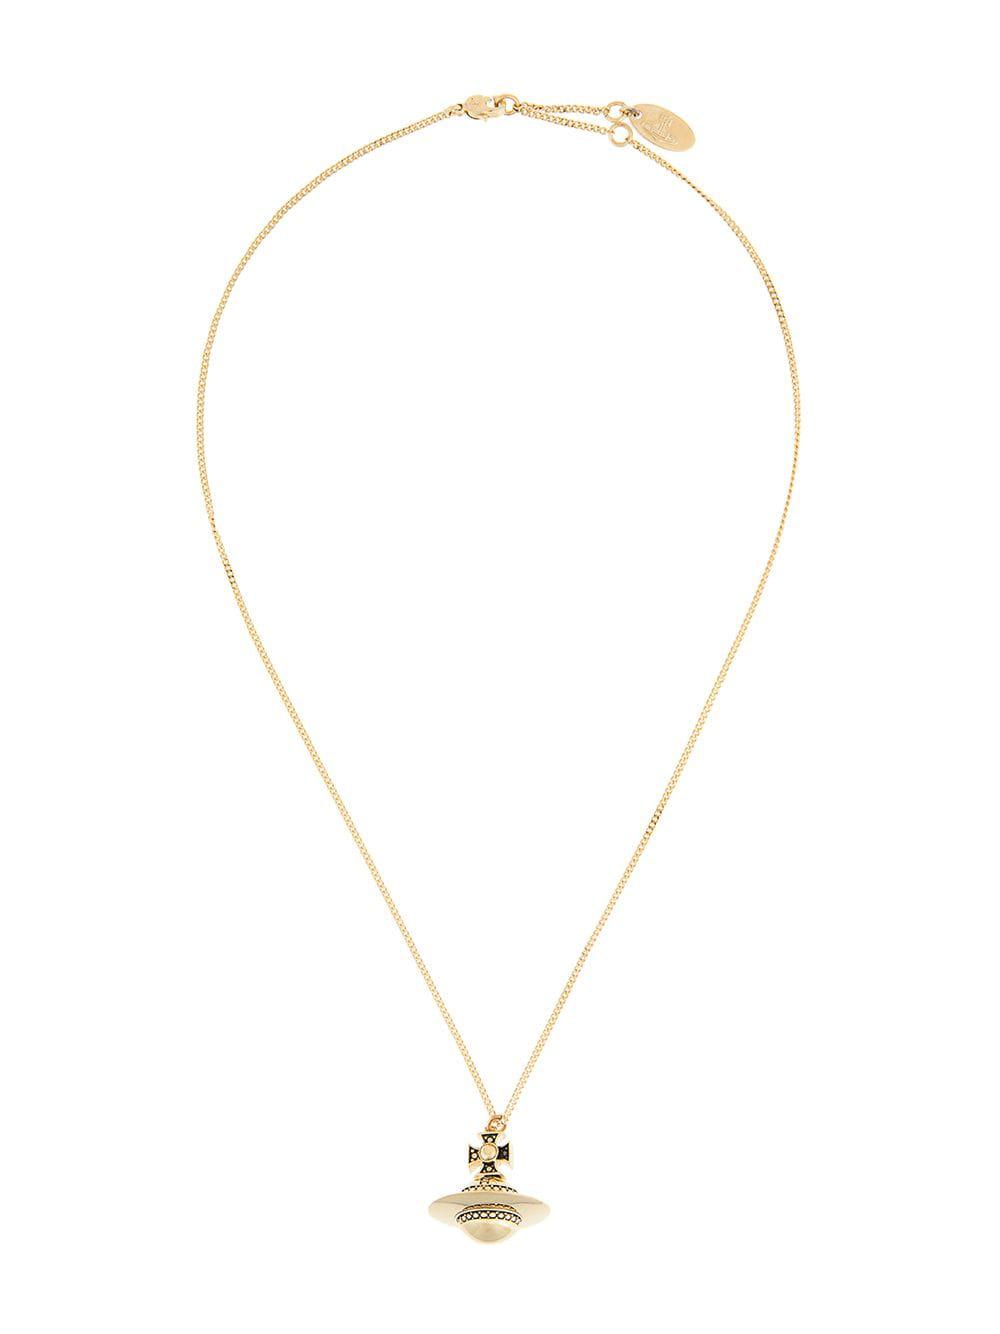 Vivienne Westwood Narcissus Small Orb Pendant Necklace in Gold